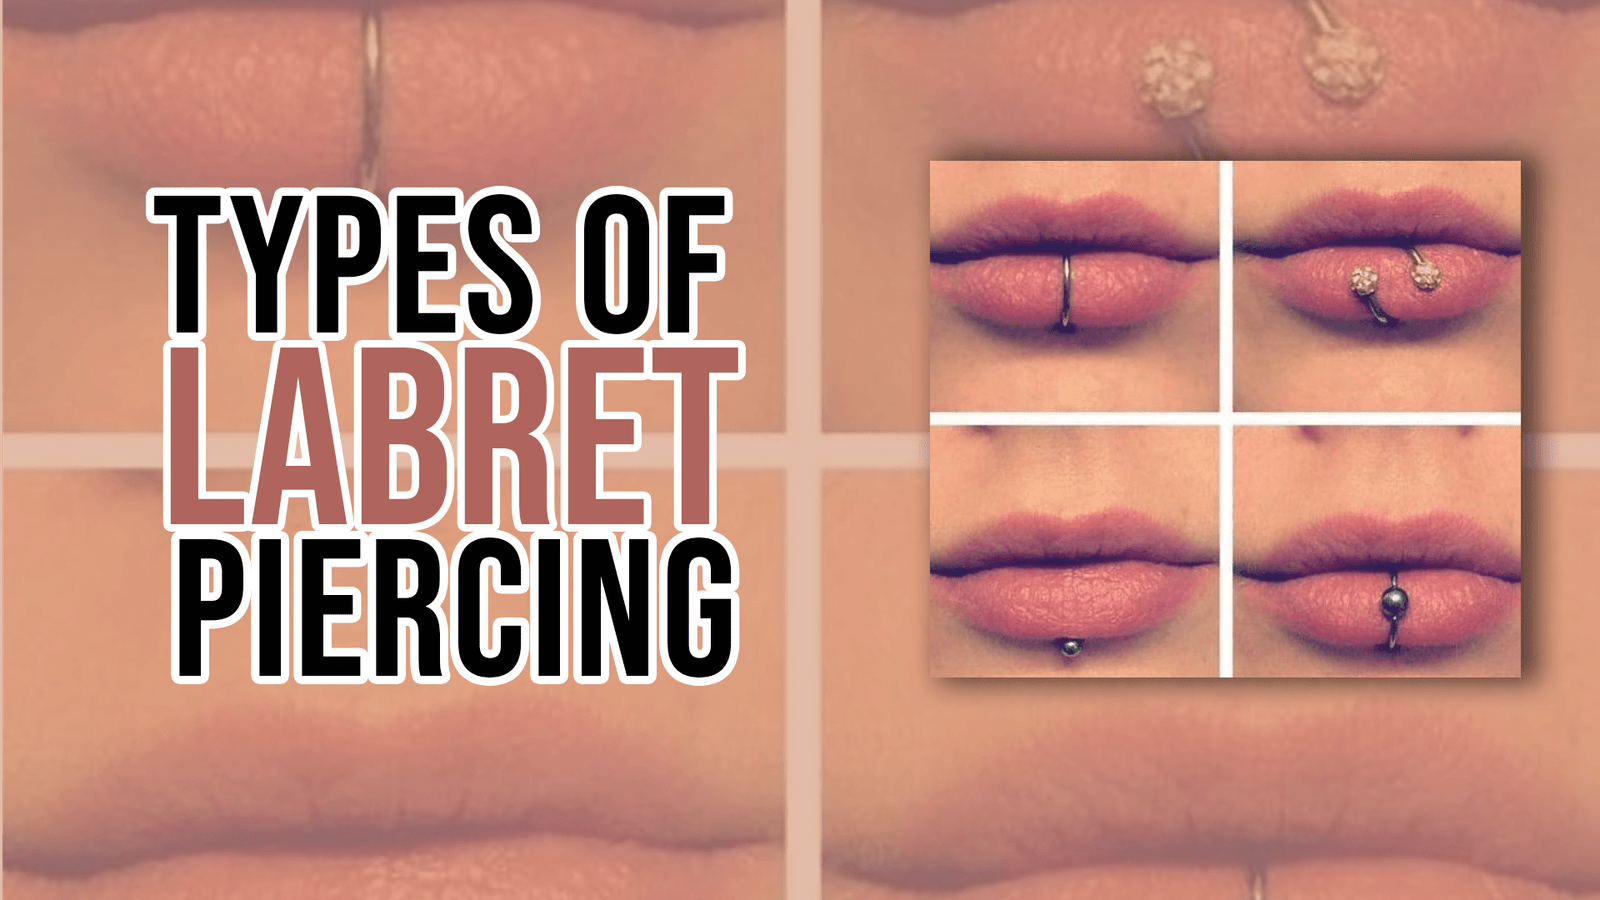 Types of Labret Piercing